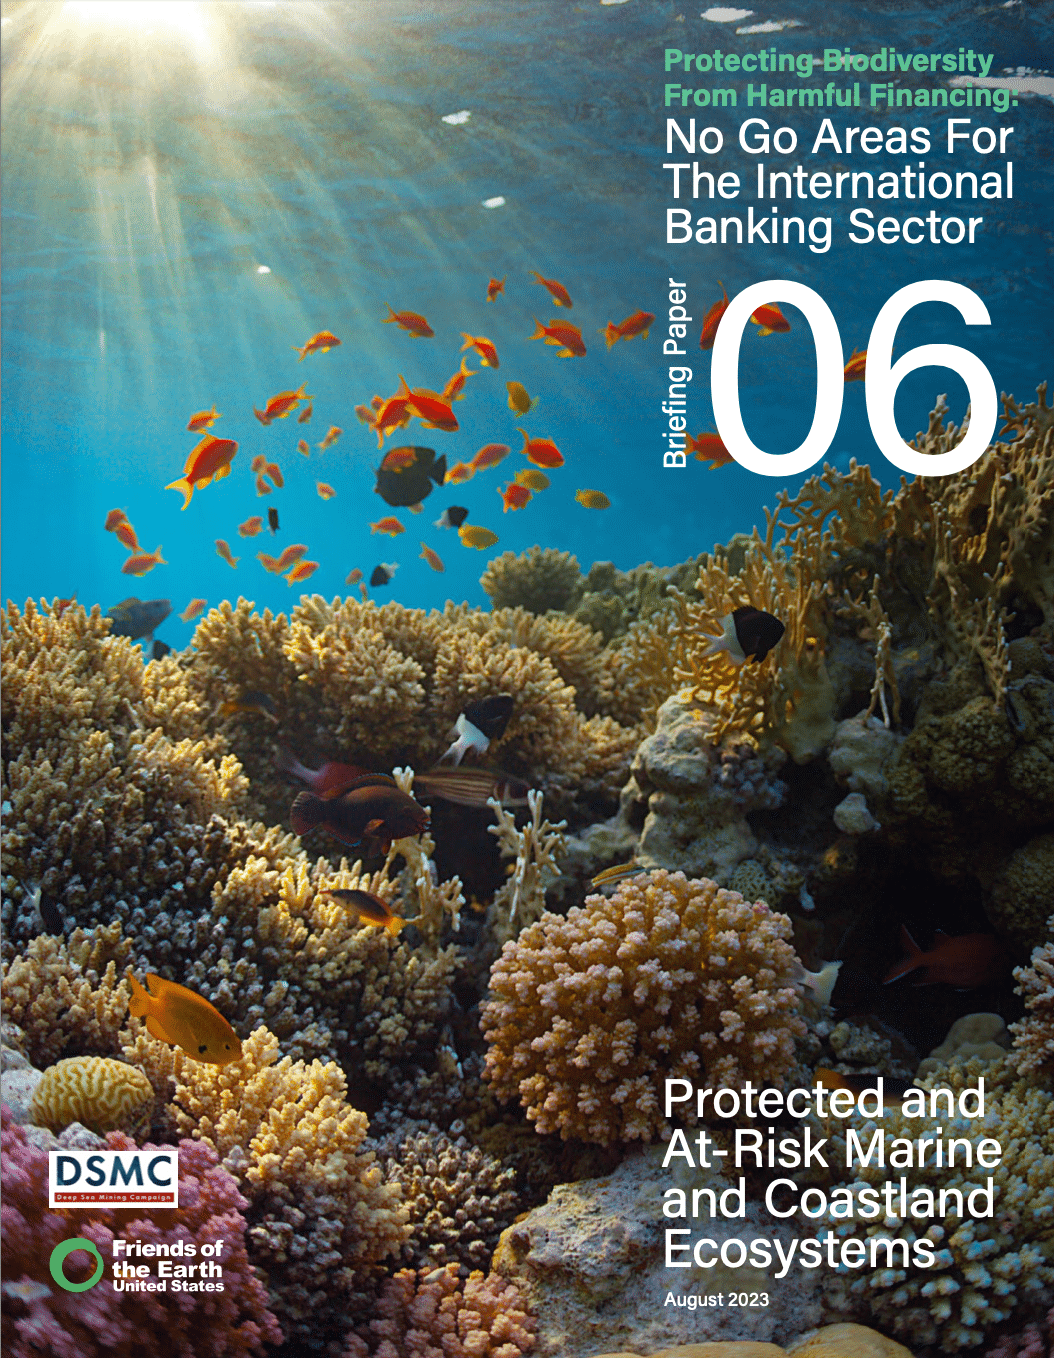 Protected and At-Risk Marine and Coastal Ecosystems